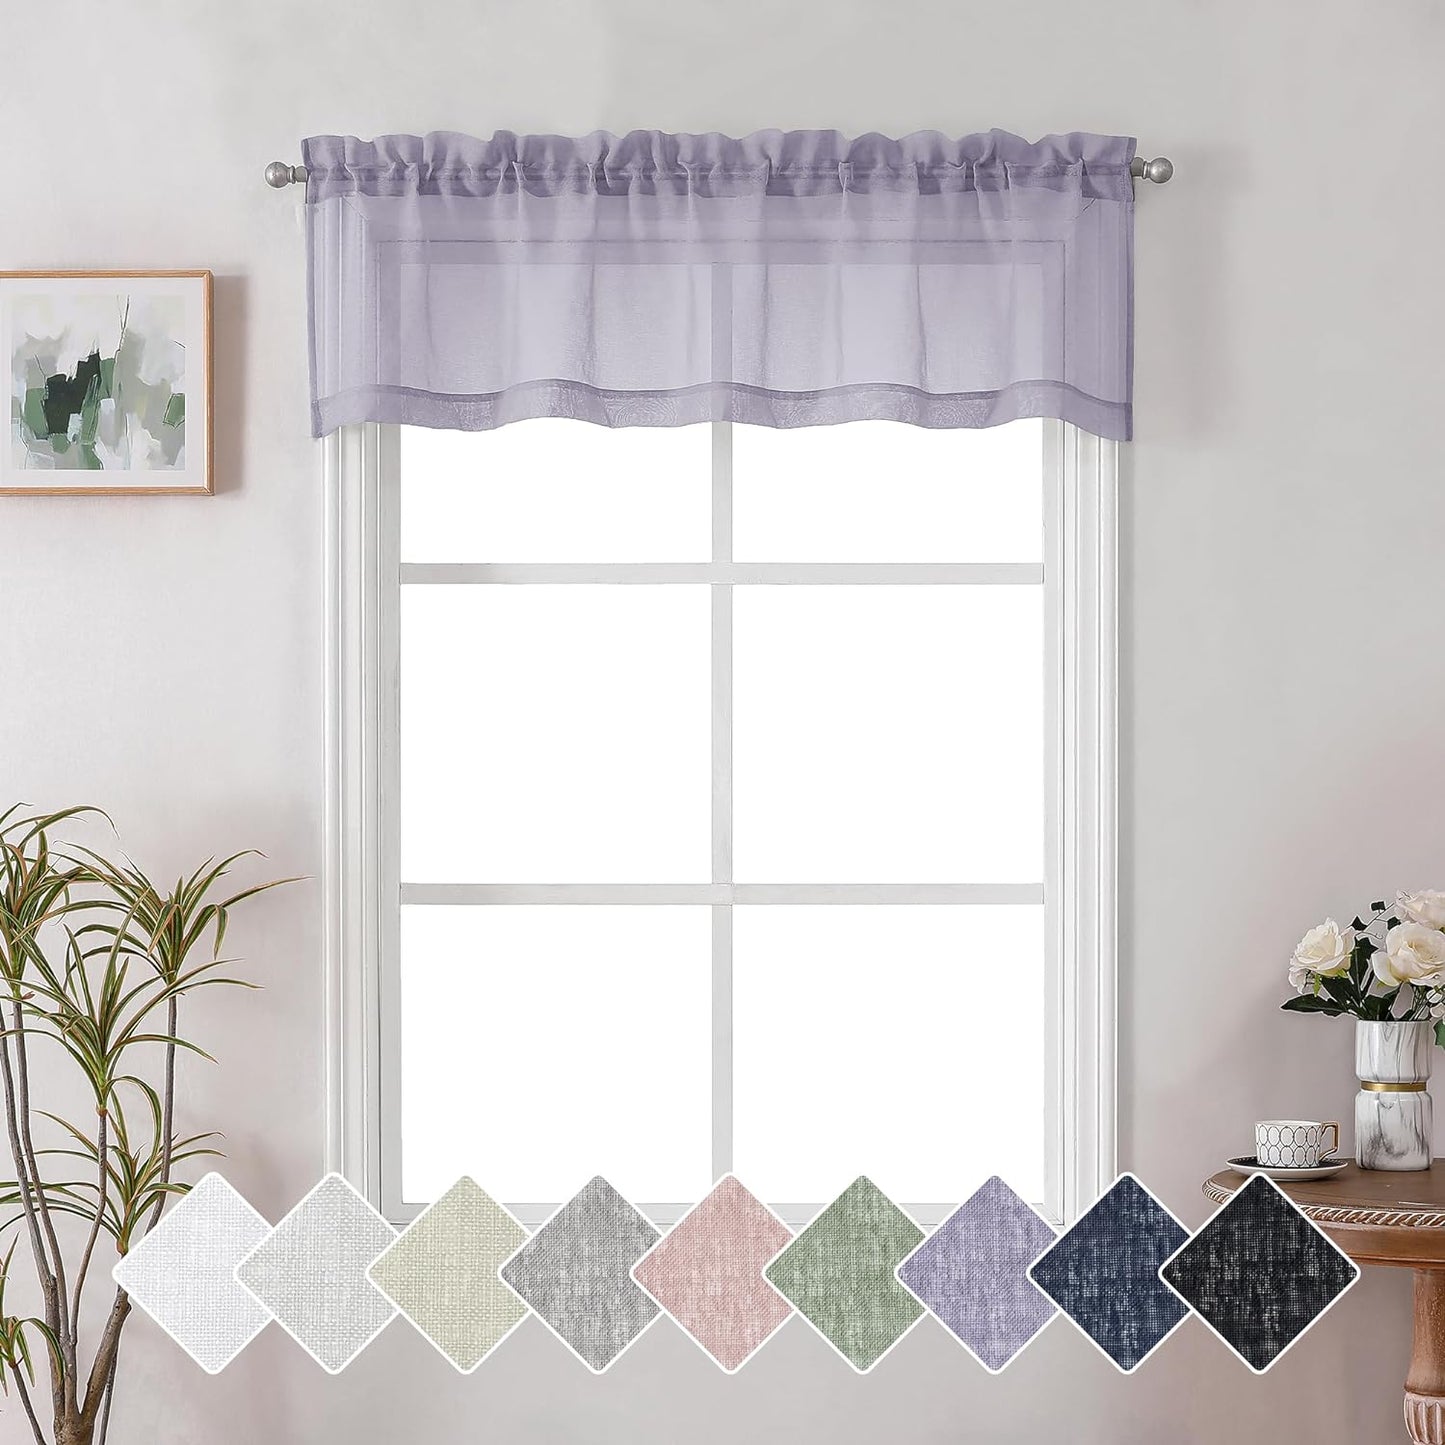 Lecloud Doris Faux Linen Sheer Grey Valance Curtains 14 Inches Length, Cafe Kitchen Bedroom Living Room Gauzy Silver Grey Curtain for Small Window, Slub Light Gray Valance Dual Rod Pockets 60X14 Inch  Lecloud Lavender 60 W X 14 L 